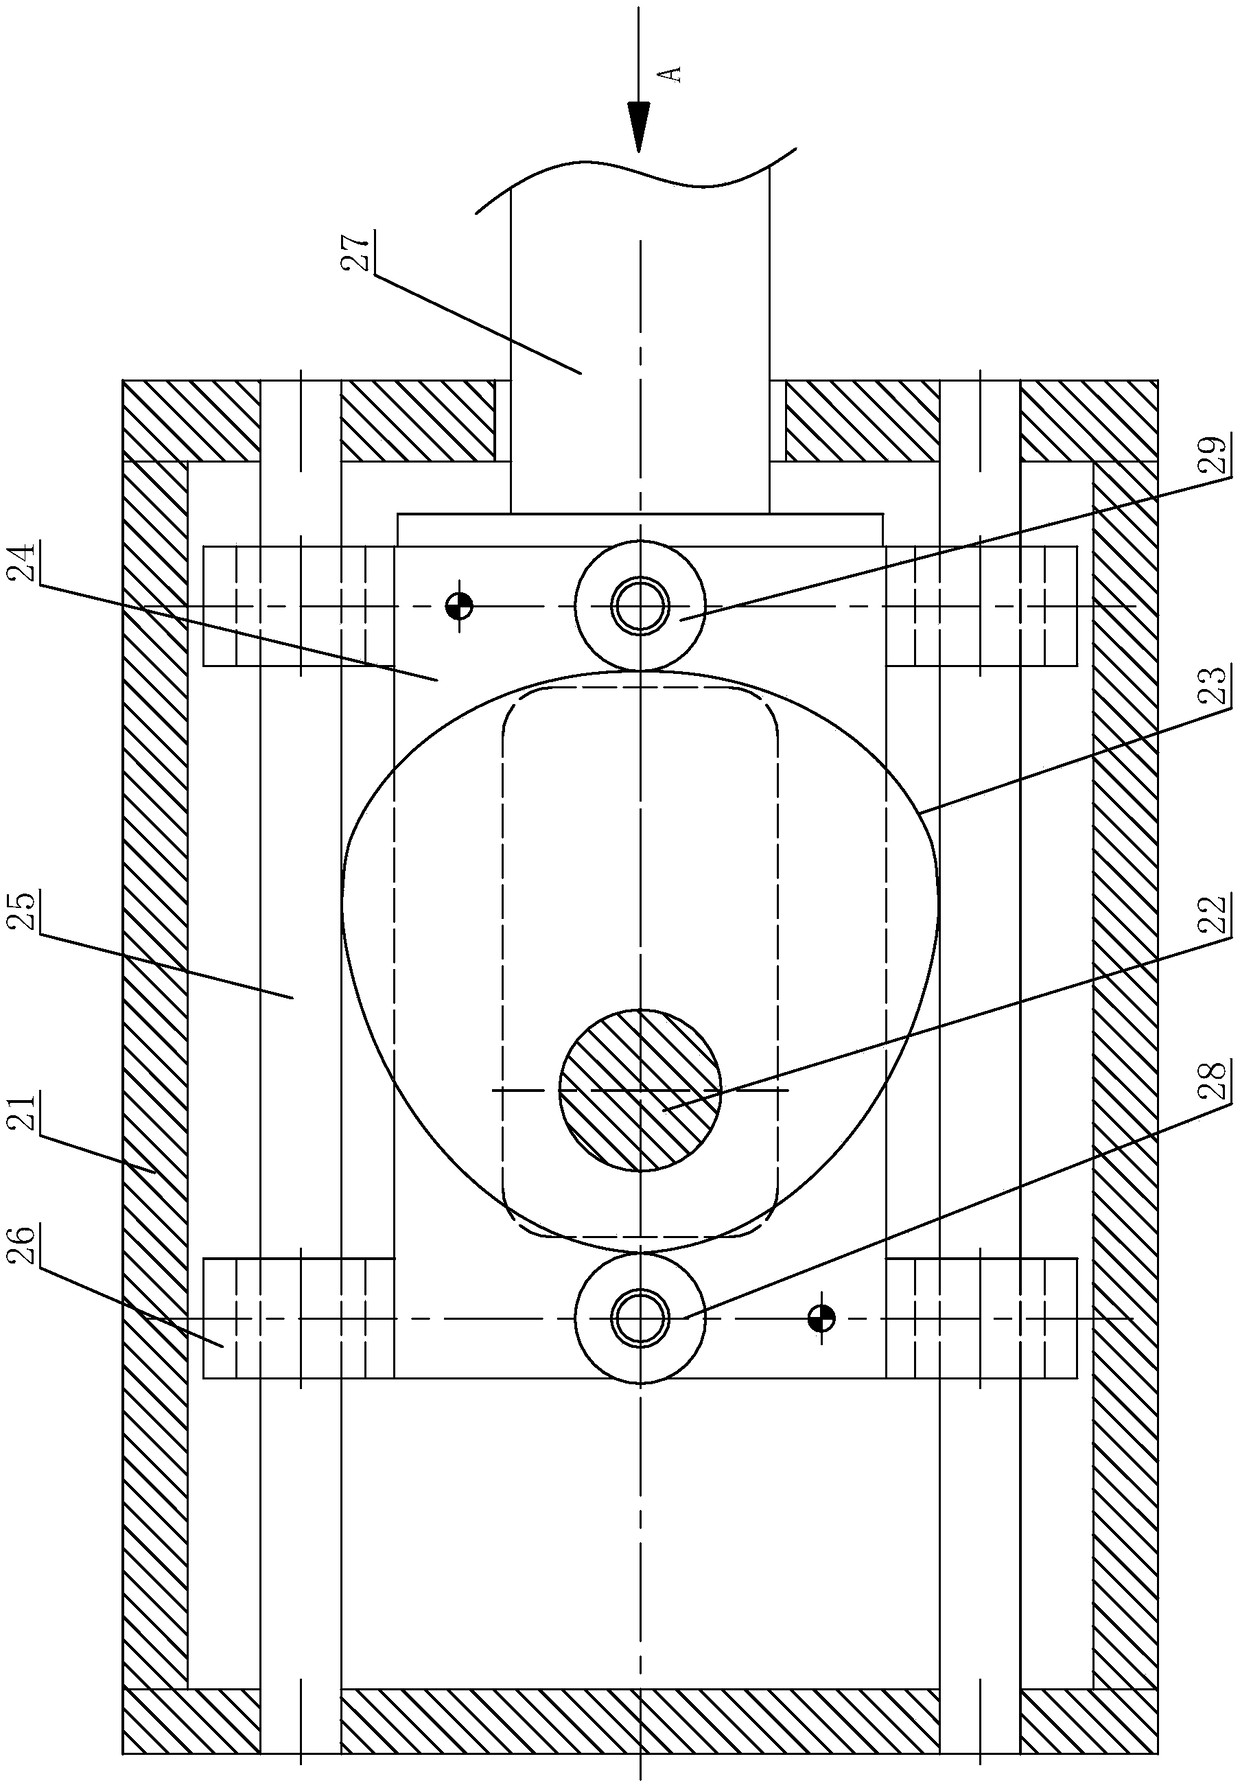 Cam box structure of material transferring mechanism for battery shell stamping